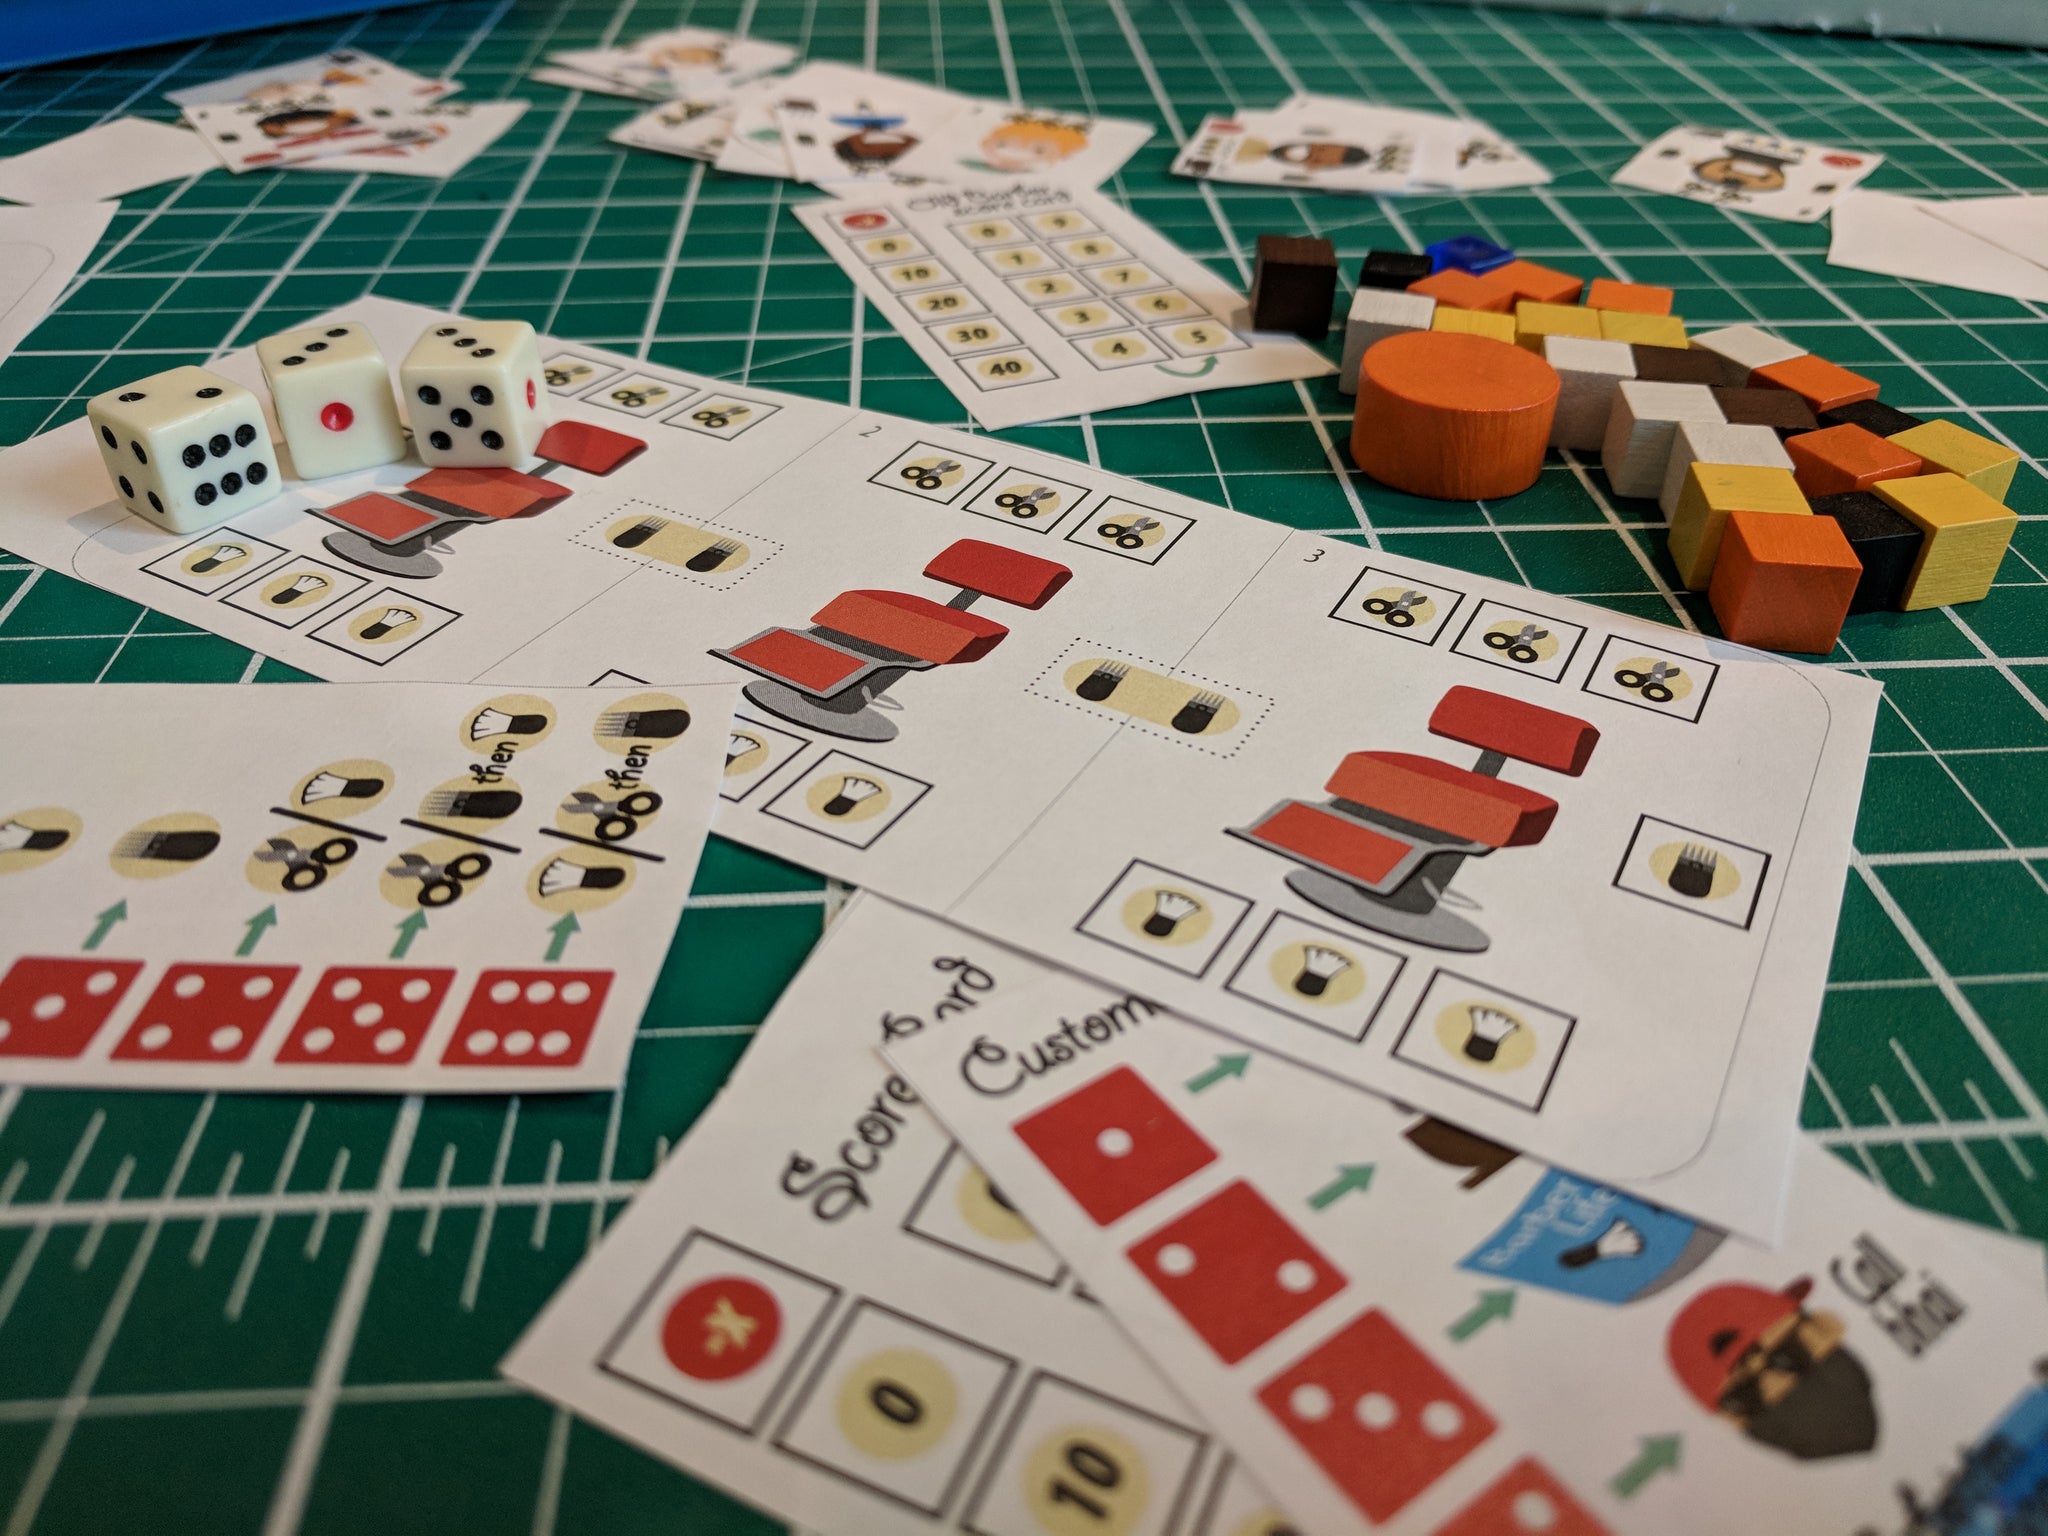 Confessions of a print and play virgin – Part I